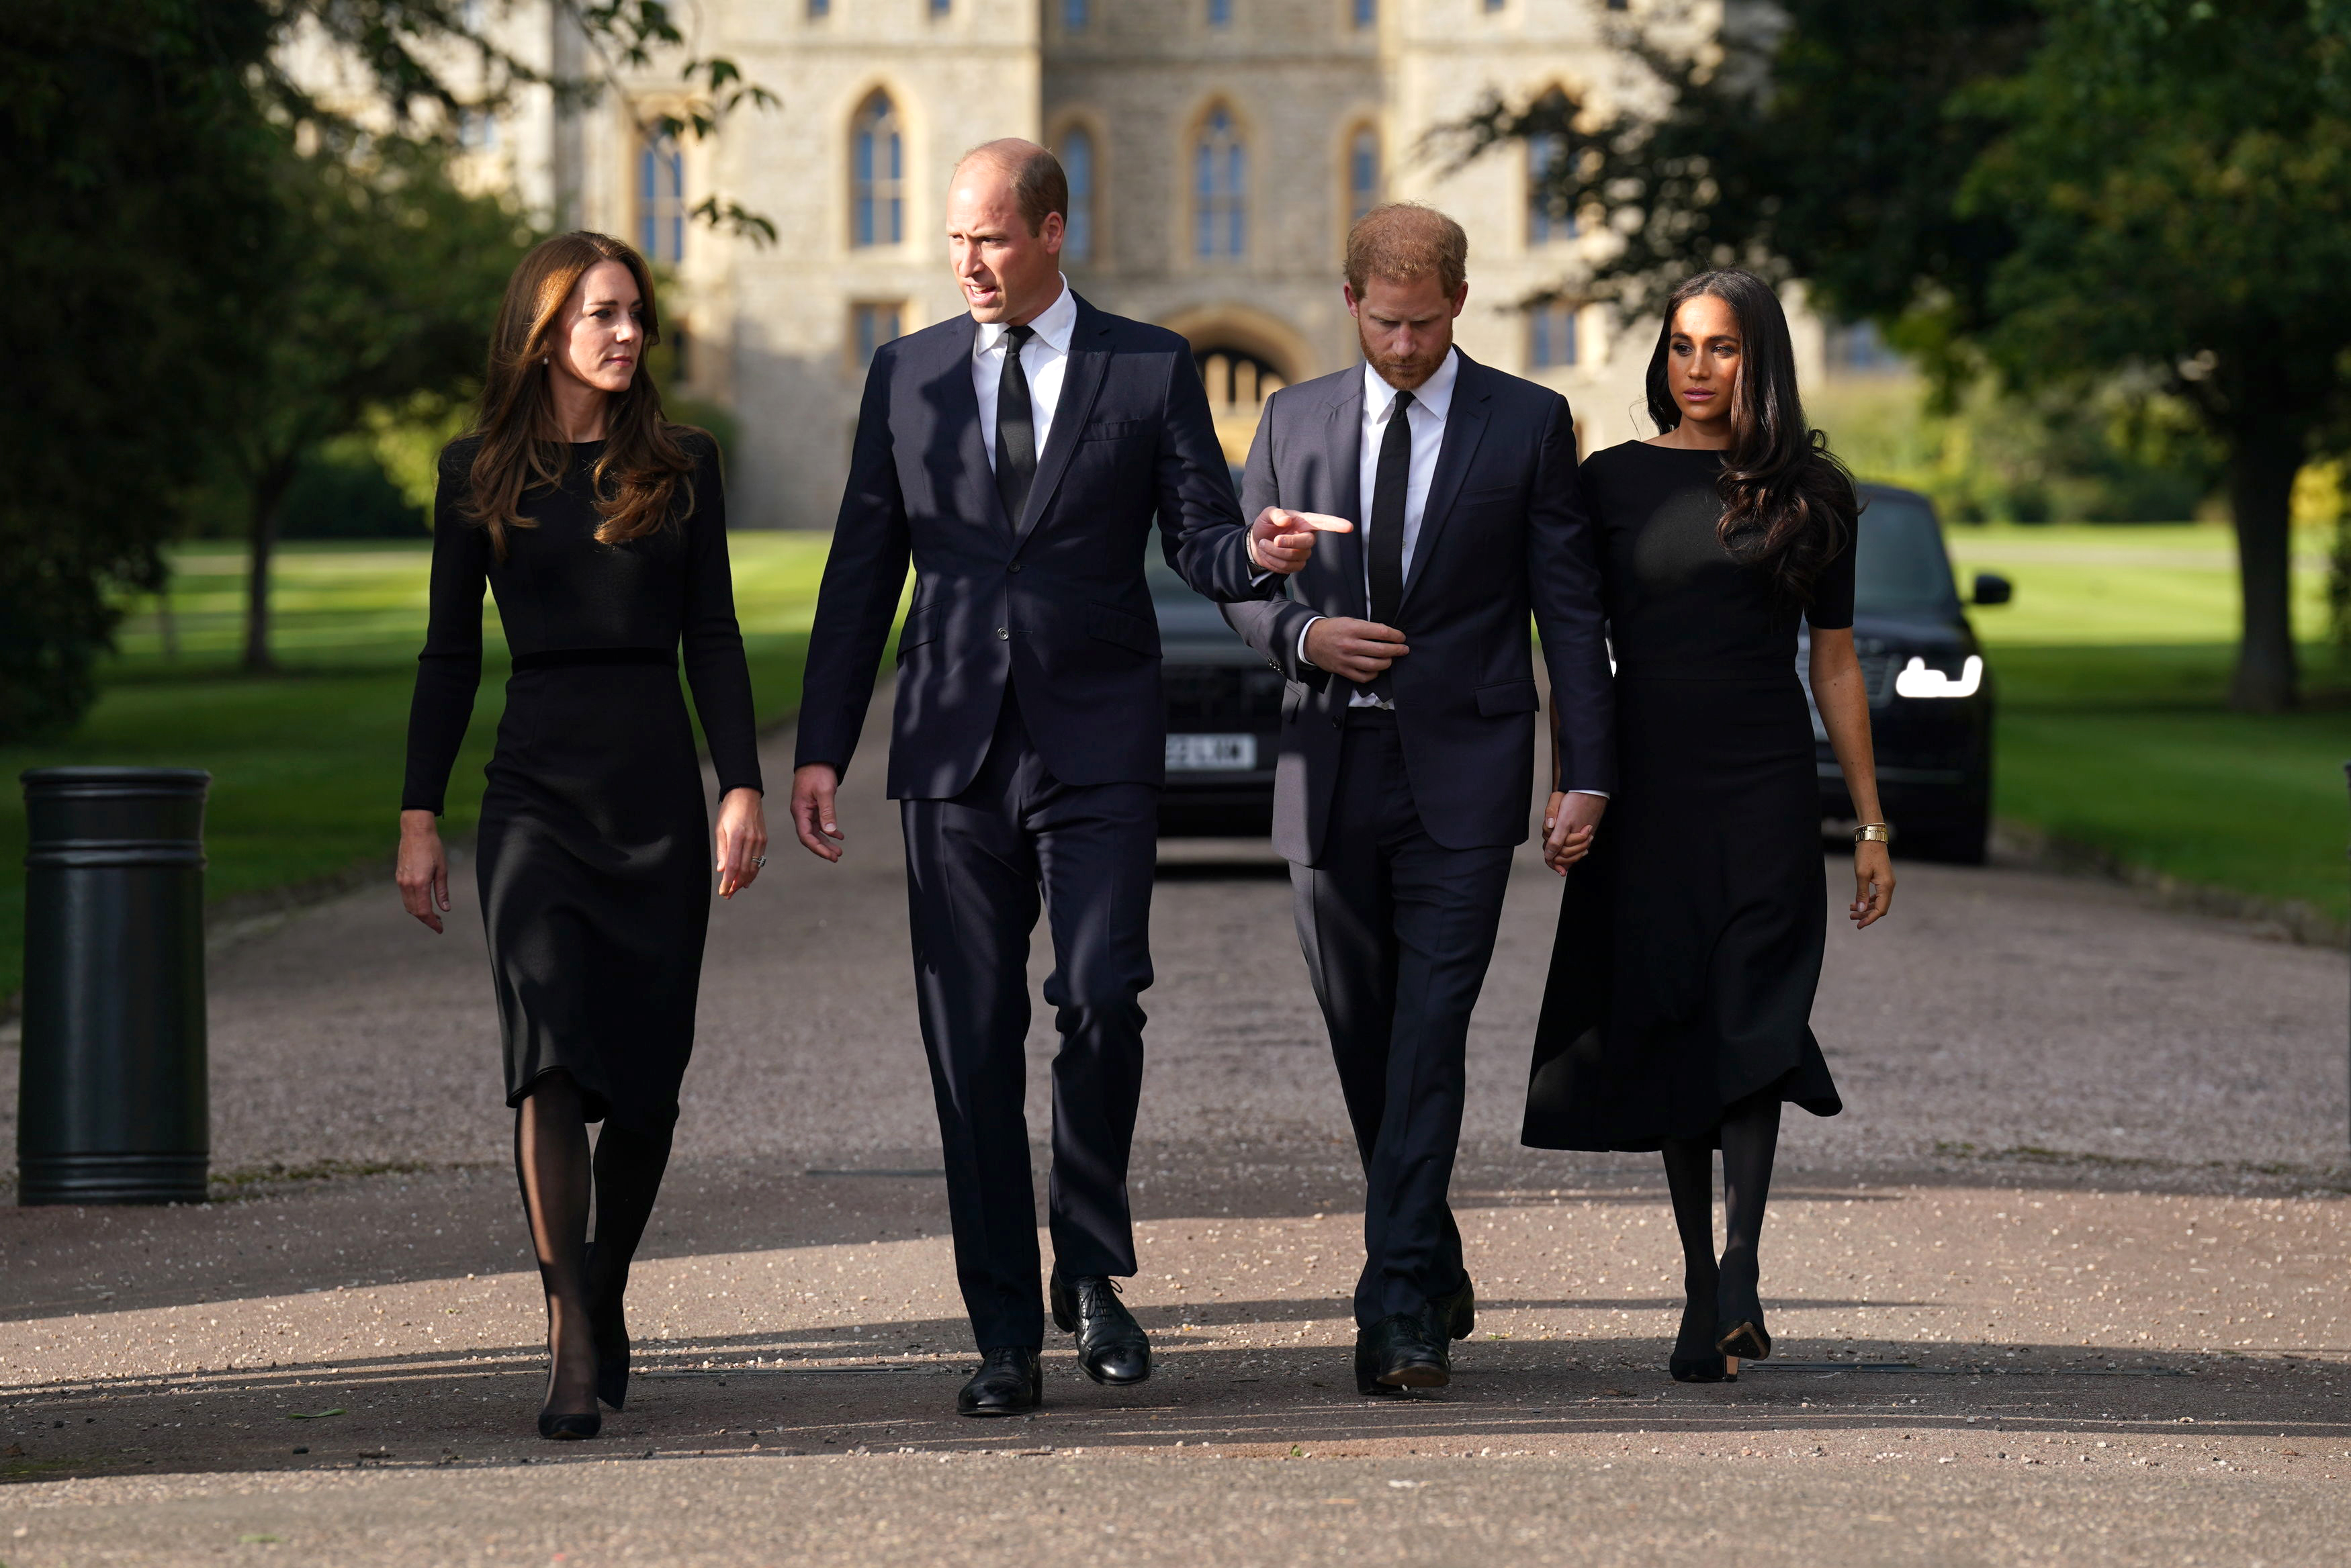 Kate Middleton, Prince William, Prince Harry and Meghan Markle on a walkabout in Windsor, England on September 10, 2022 | Source: Getty Images